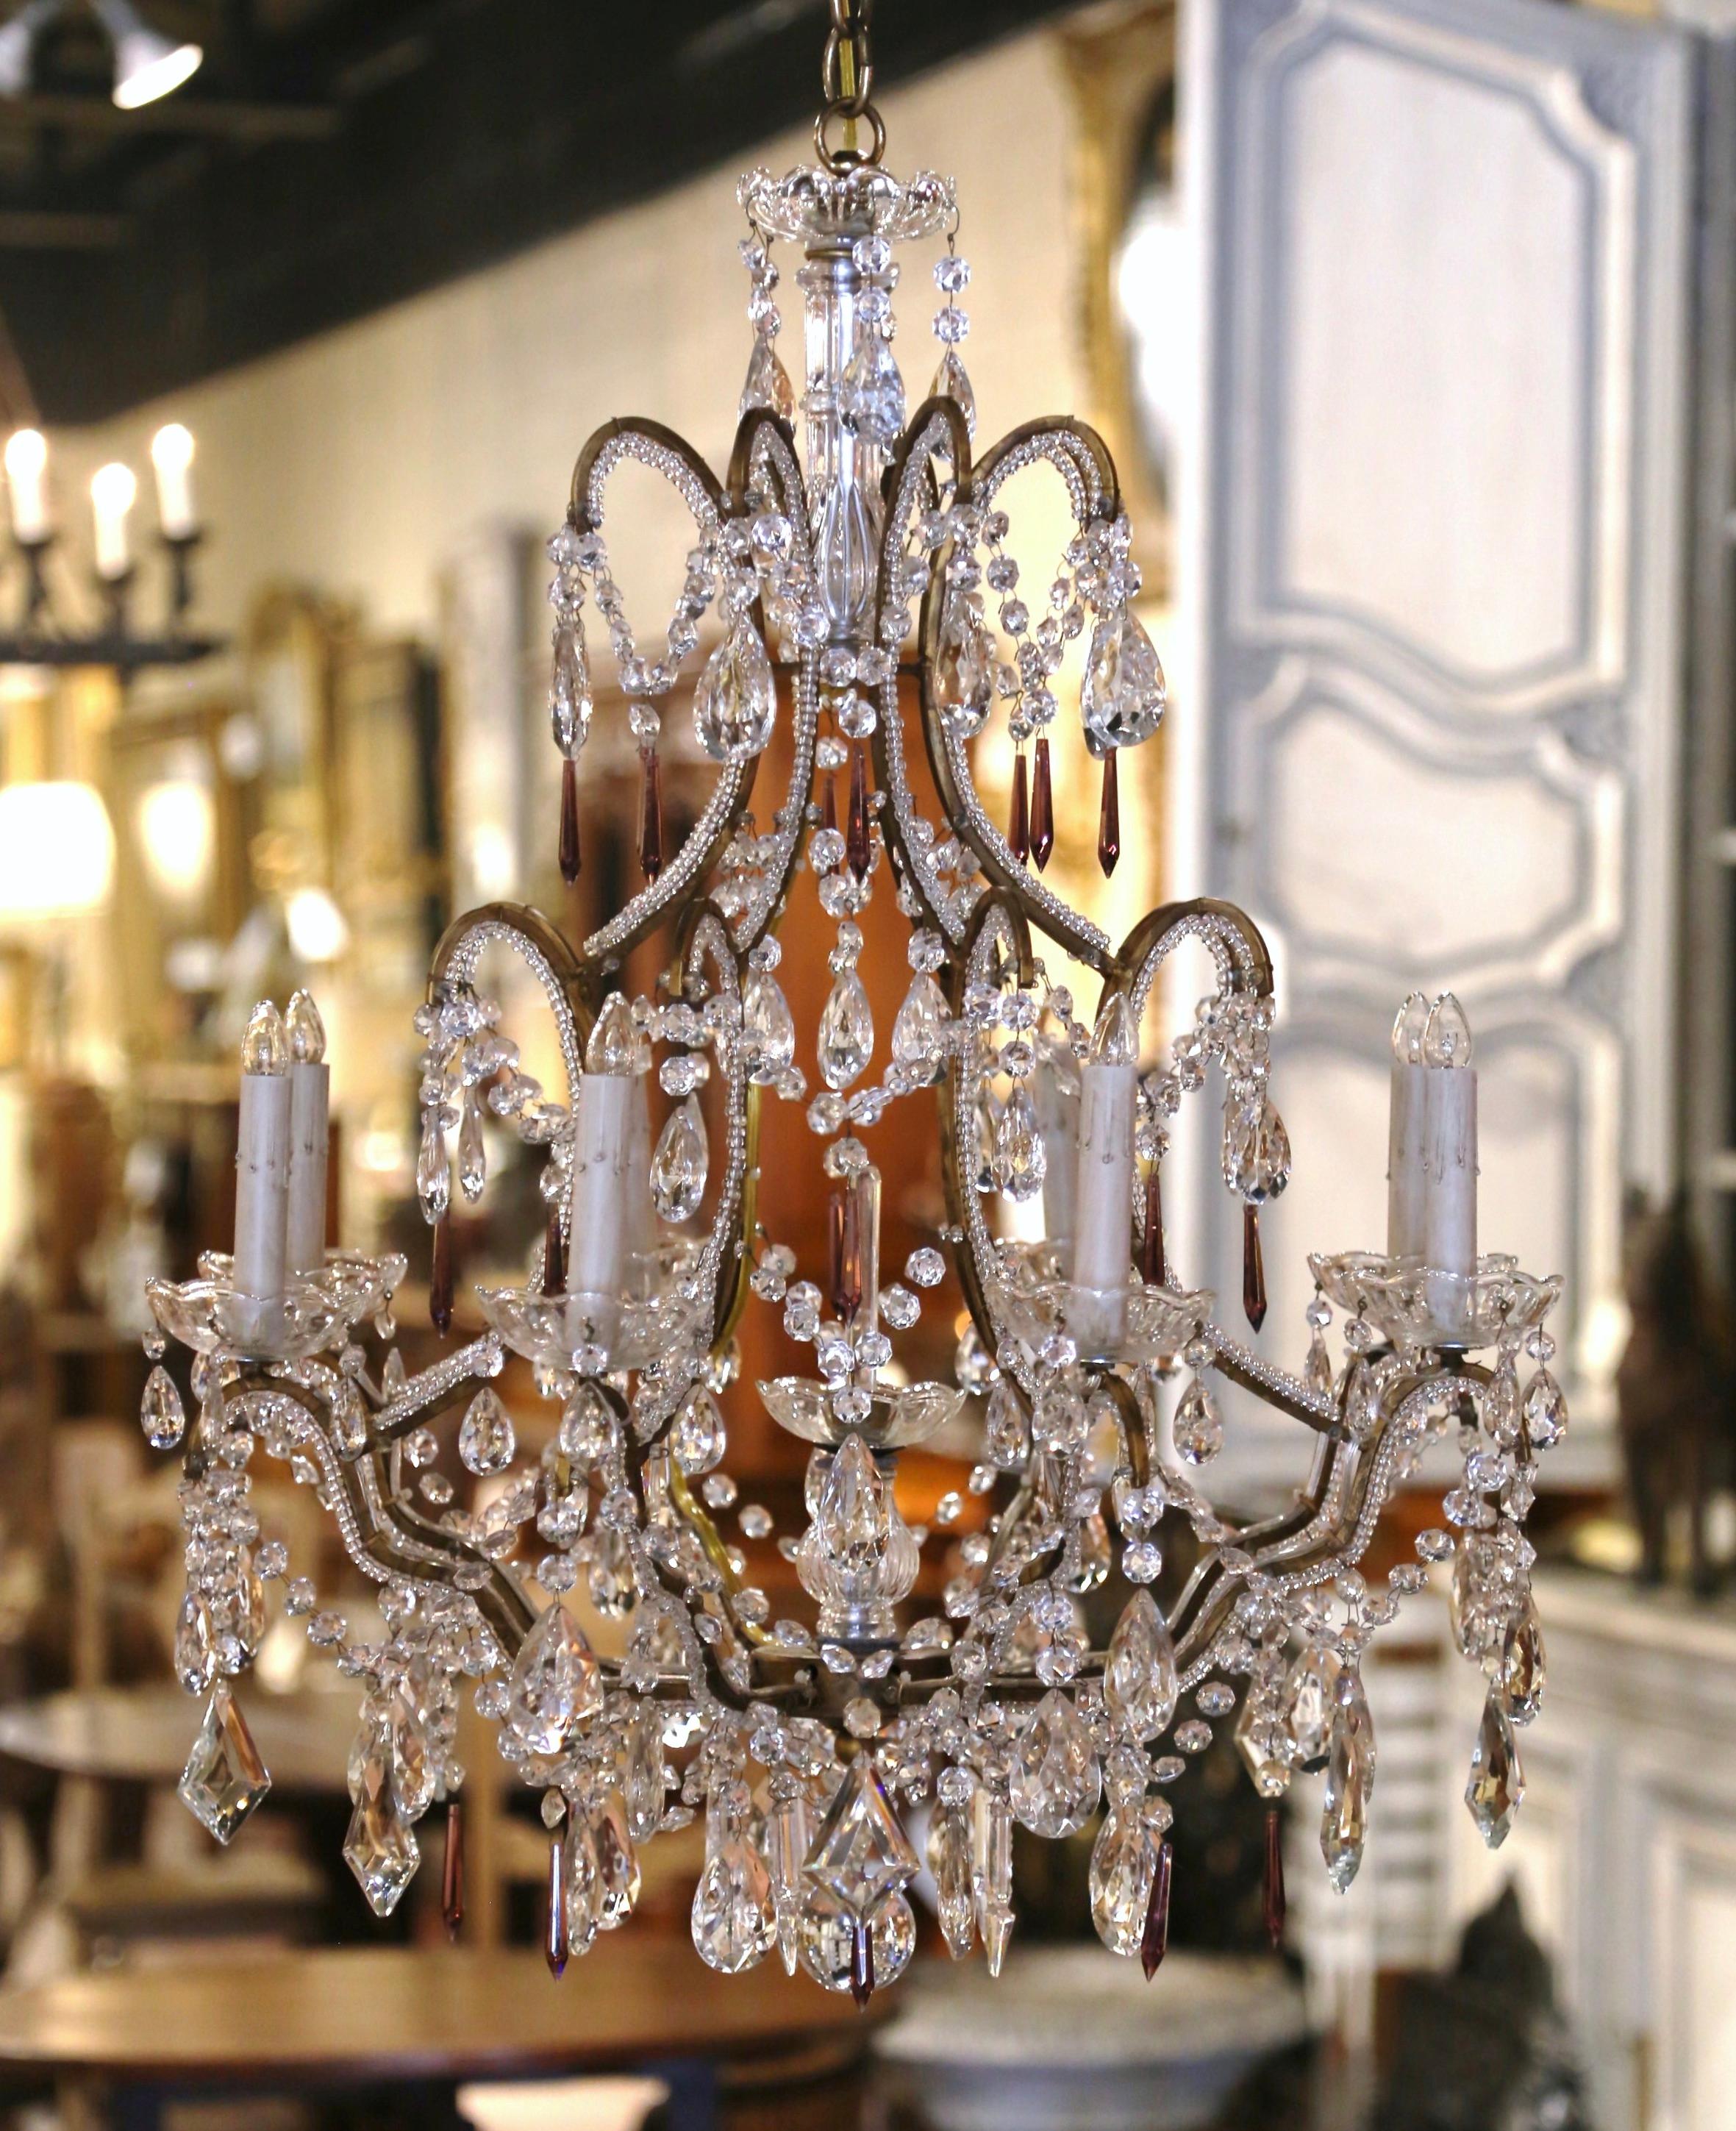 This elegant, antique light fixture was crafted in Italy, circa 1880. The ornate, stately chandelier features eight brass arms with lights embellished with decorative crystal and flower pendants throughout; it is further dressed with decorative